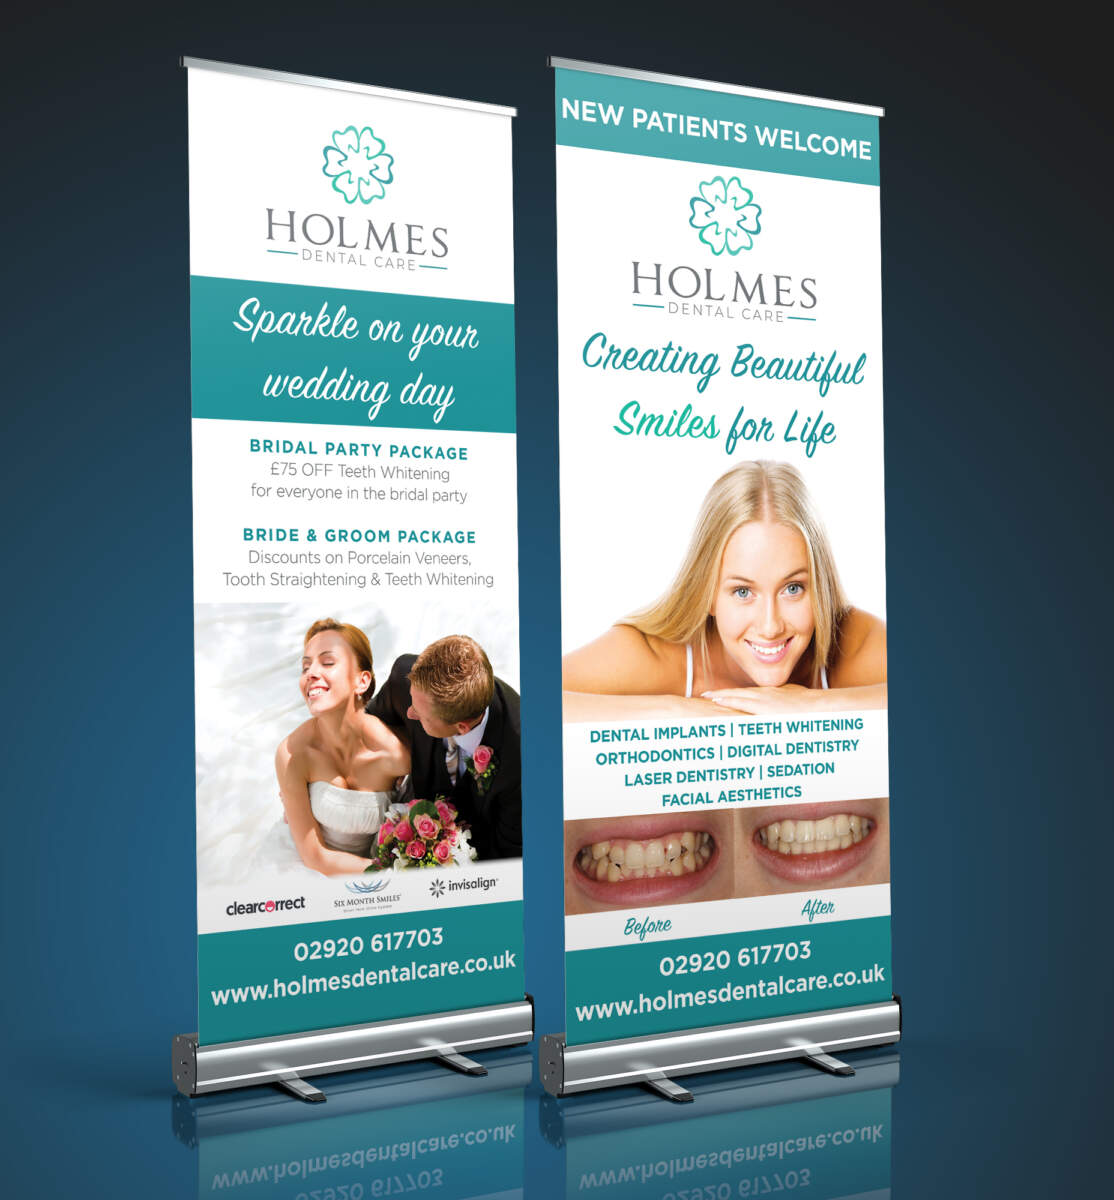 Holmes Banners